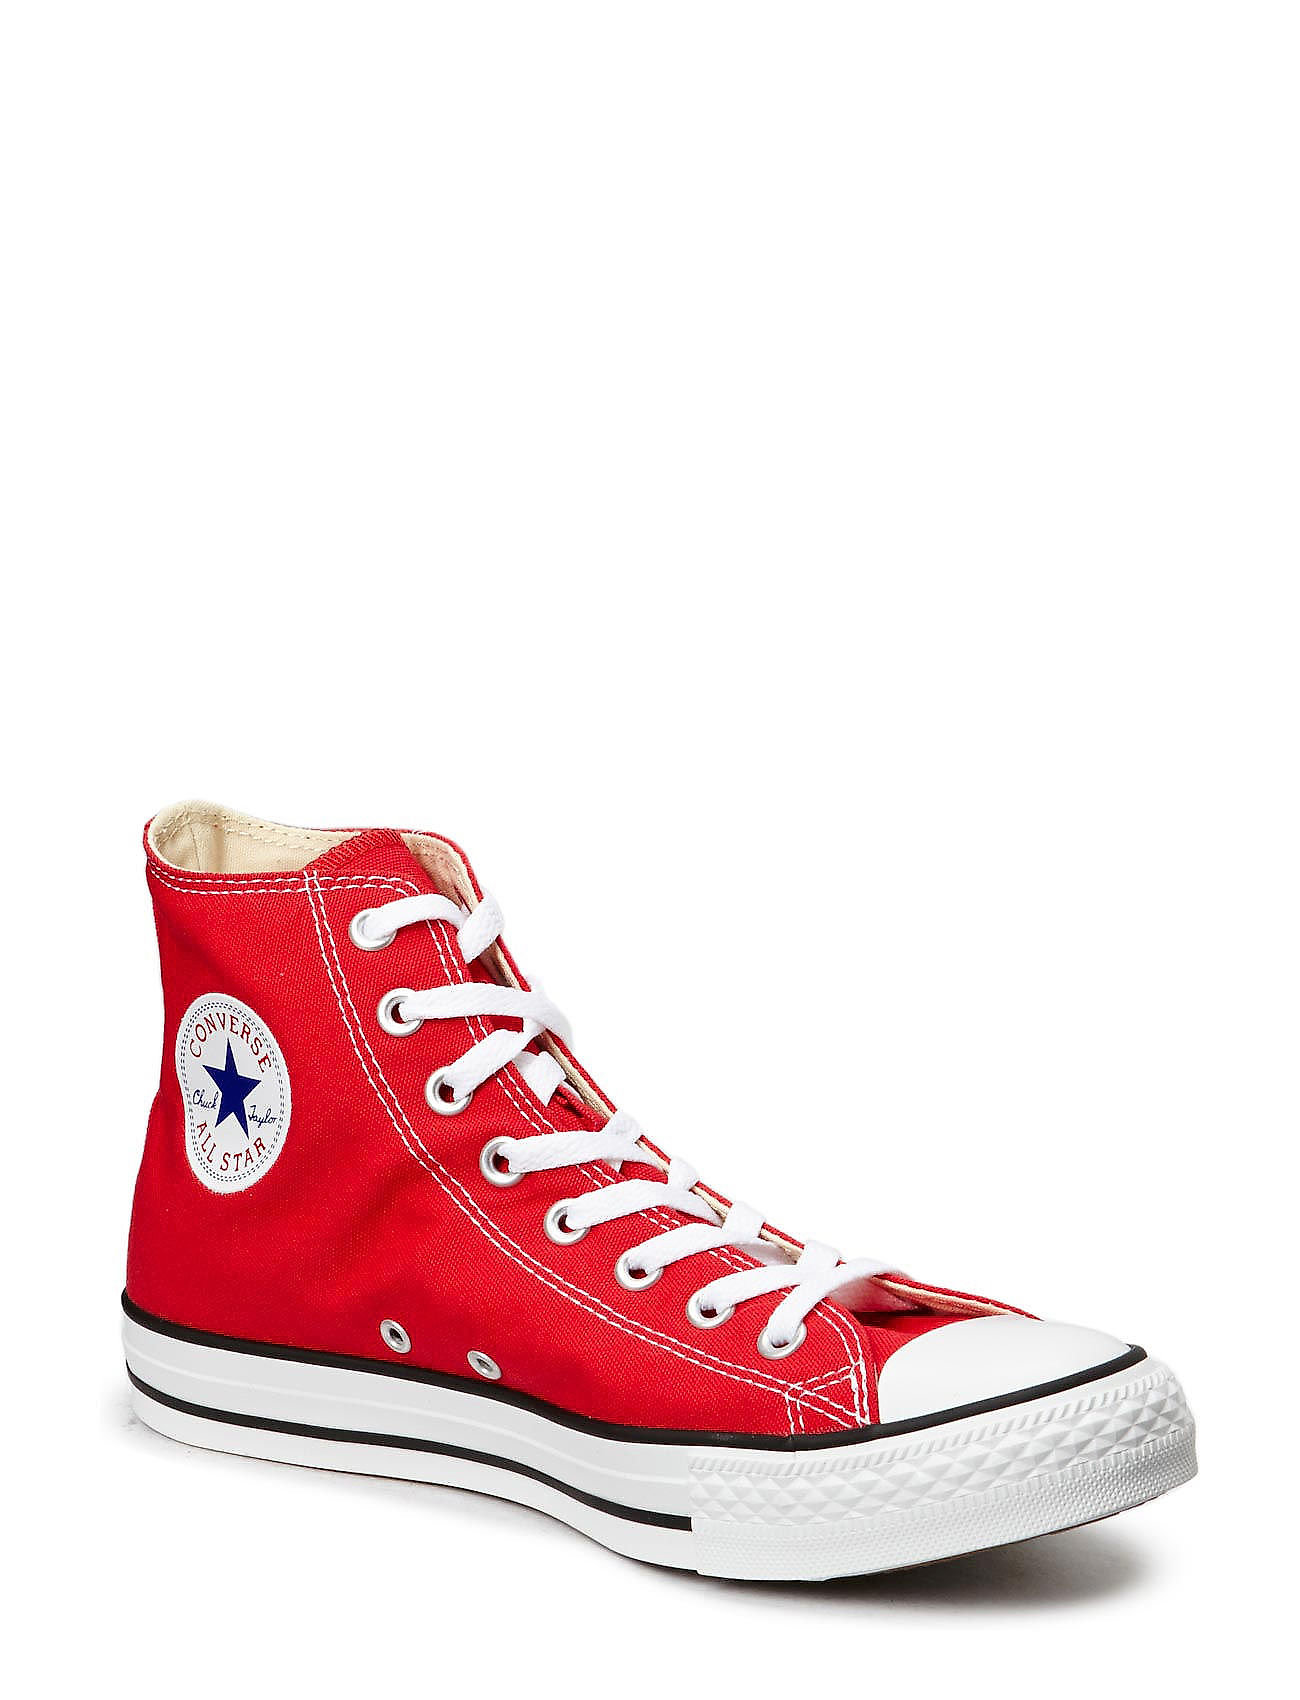 Chuck Taylor All Star High-top Sneakers Red Converse